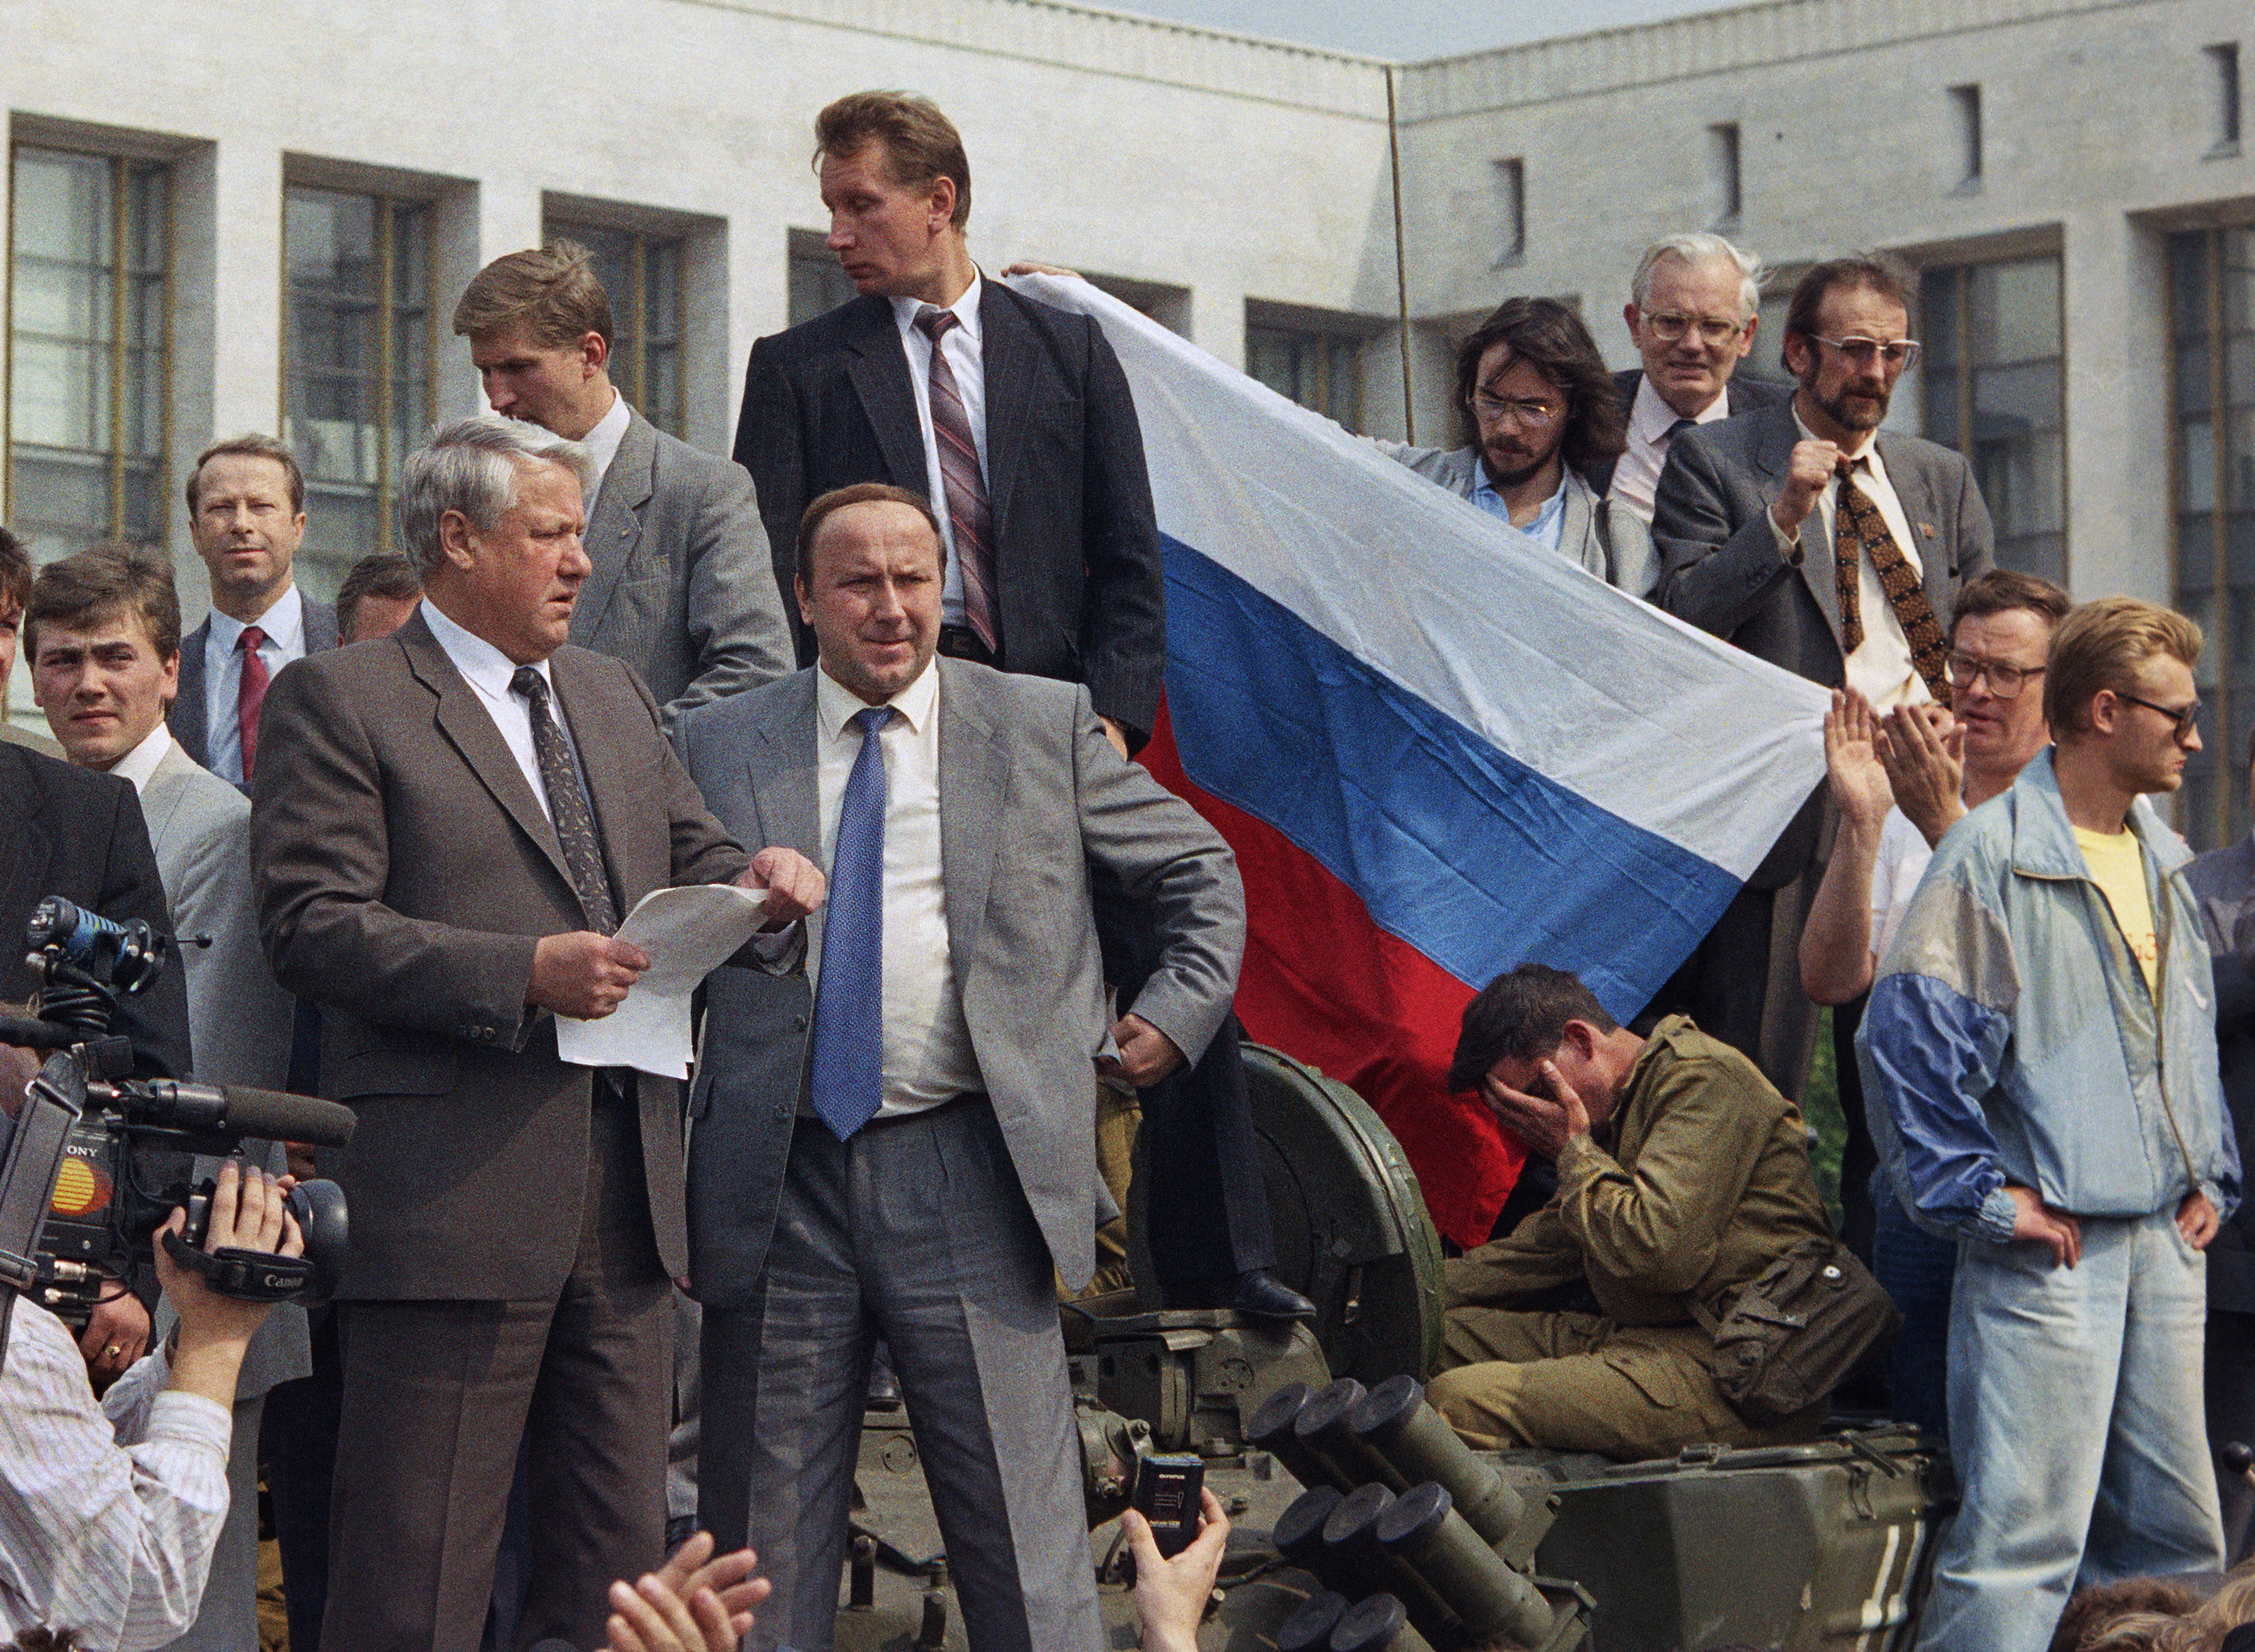 Boris Yeltsin, president of the Russian Federation, makes a speech from atop a tank in front of the Russian parliament building in Moscow, U.S.S.R., Monday, Aug. 19, 1991. Yeltsin called on the Russian people to resist the communist hard liners in the Soviet coup. (AP Photo)